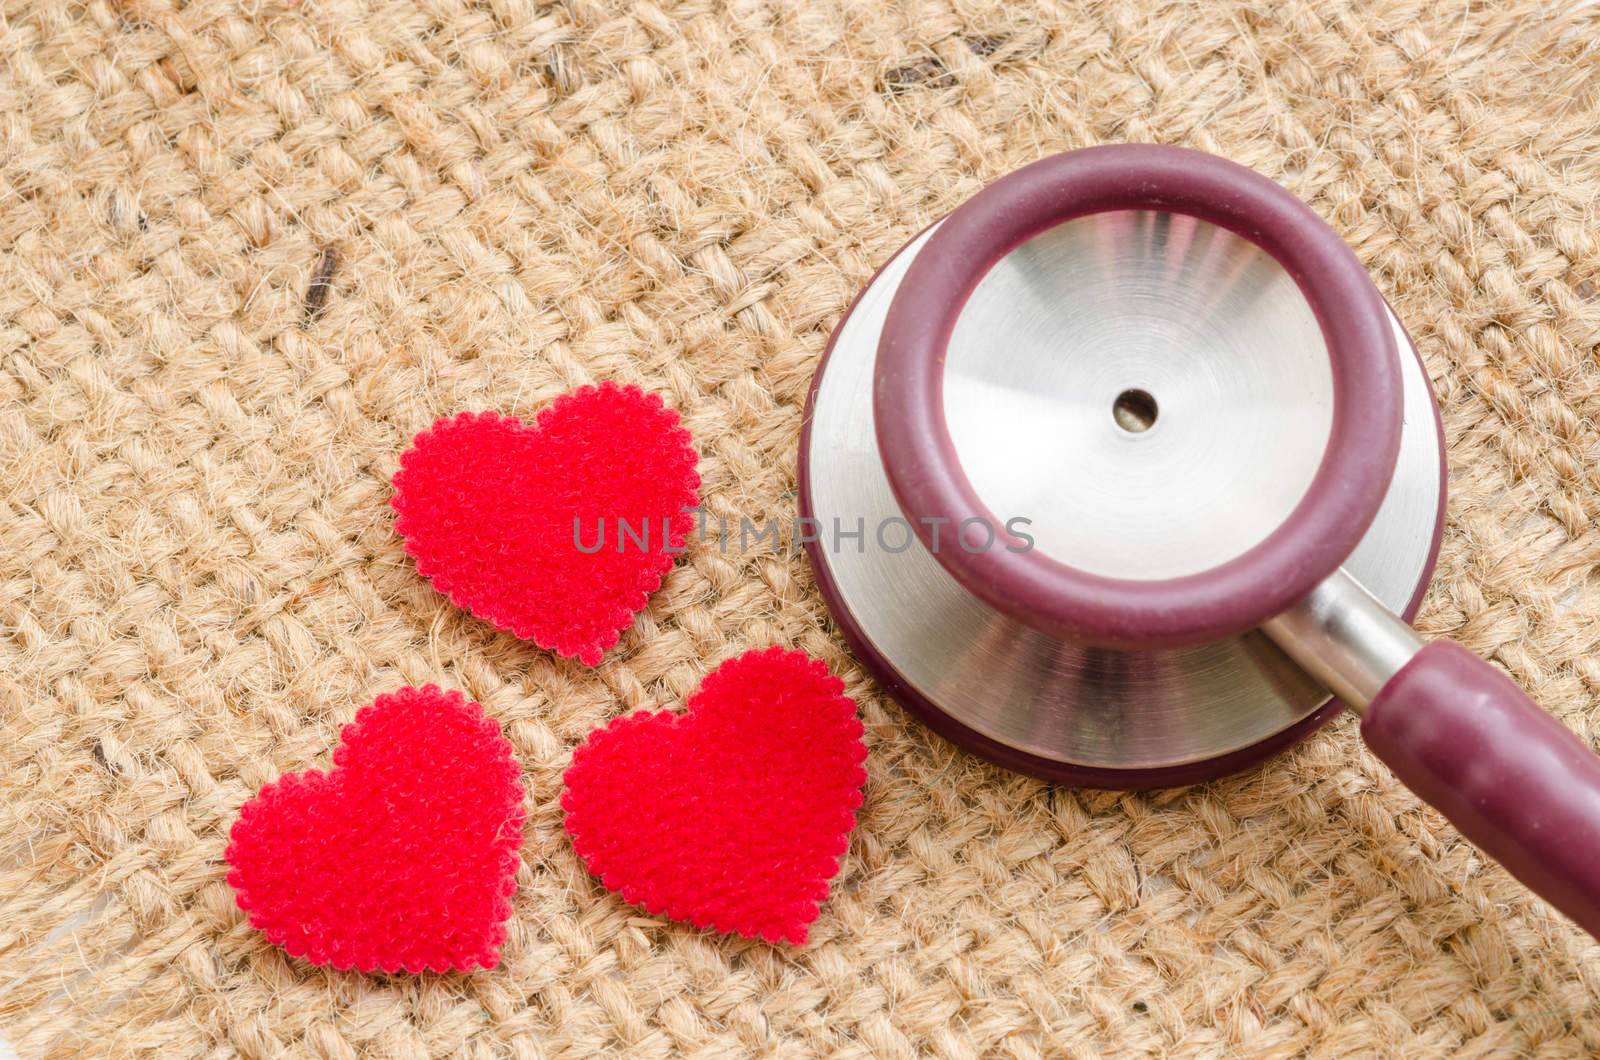 Red heart and a stethoscope by Gamjai